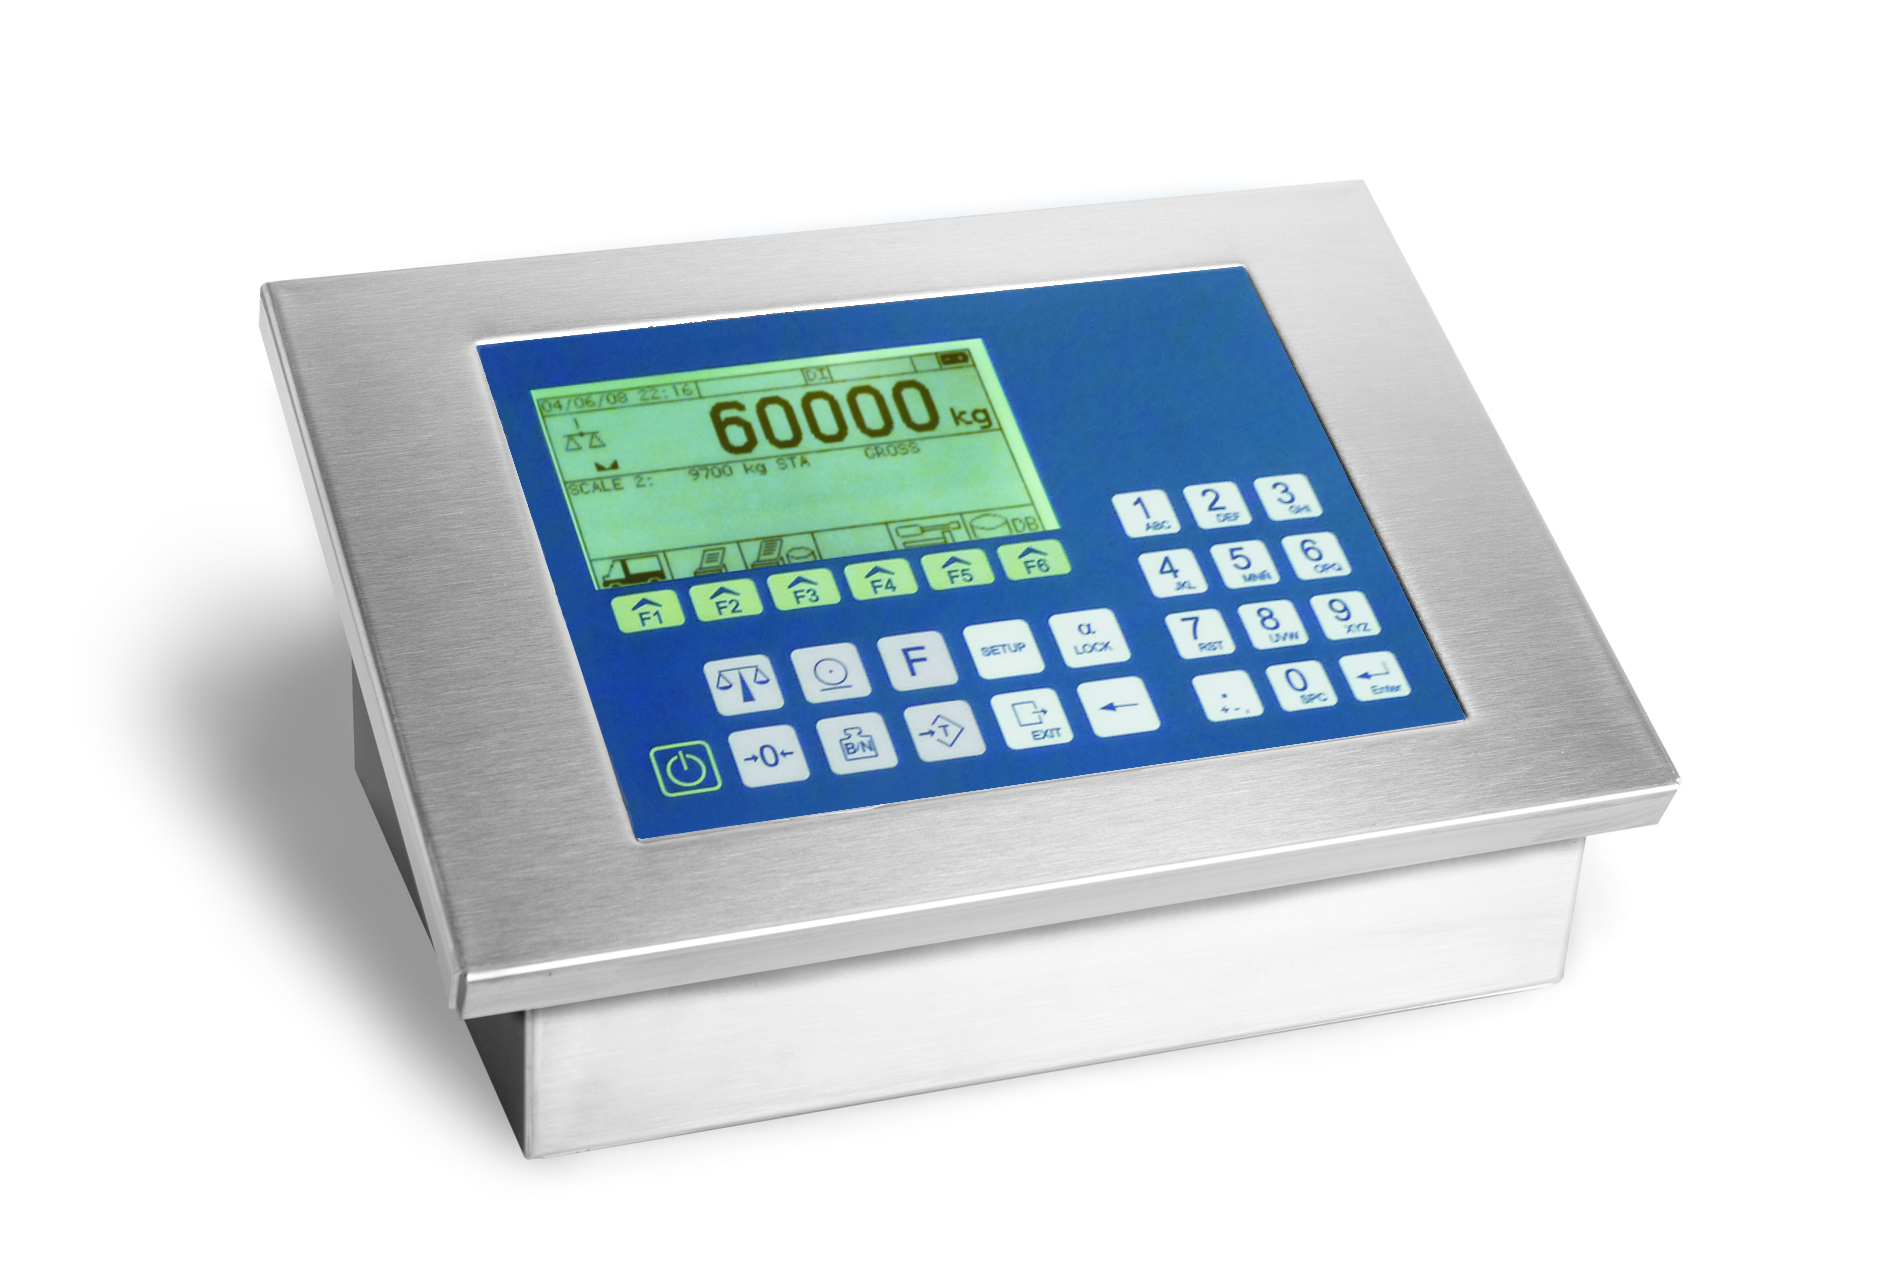 Utilcell Matrix II - High Performance Industrial Dosing Controller by Weight